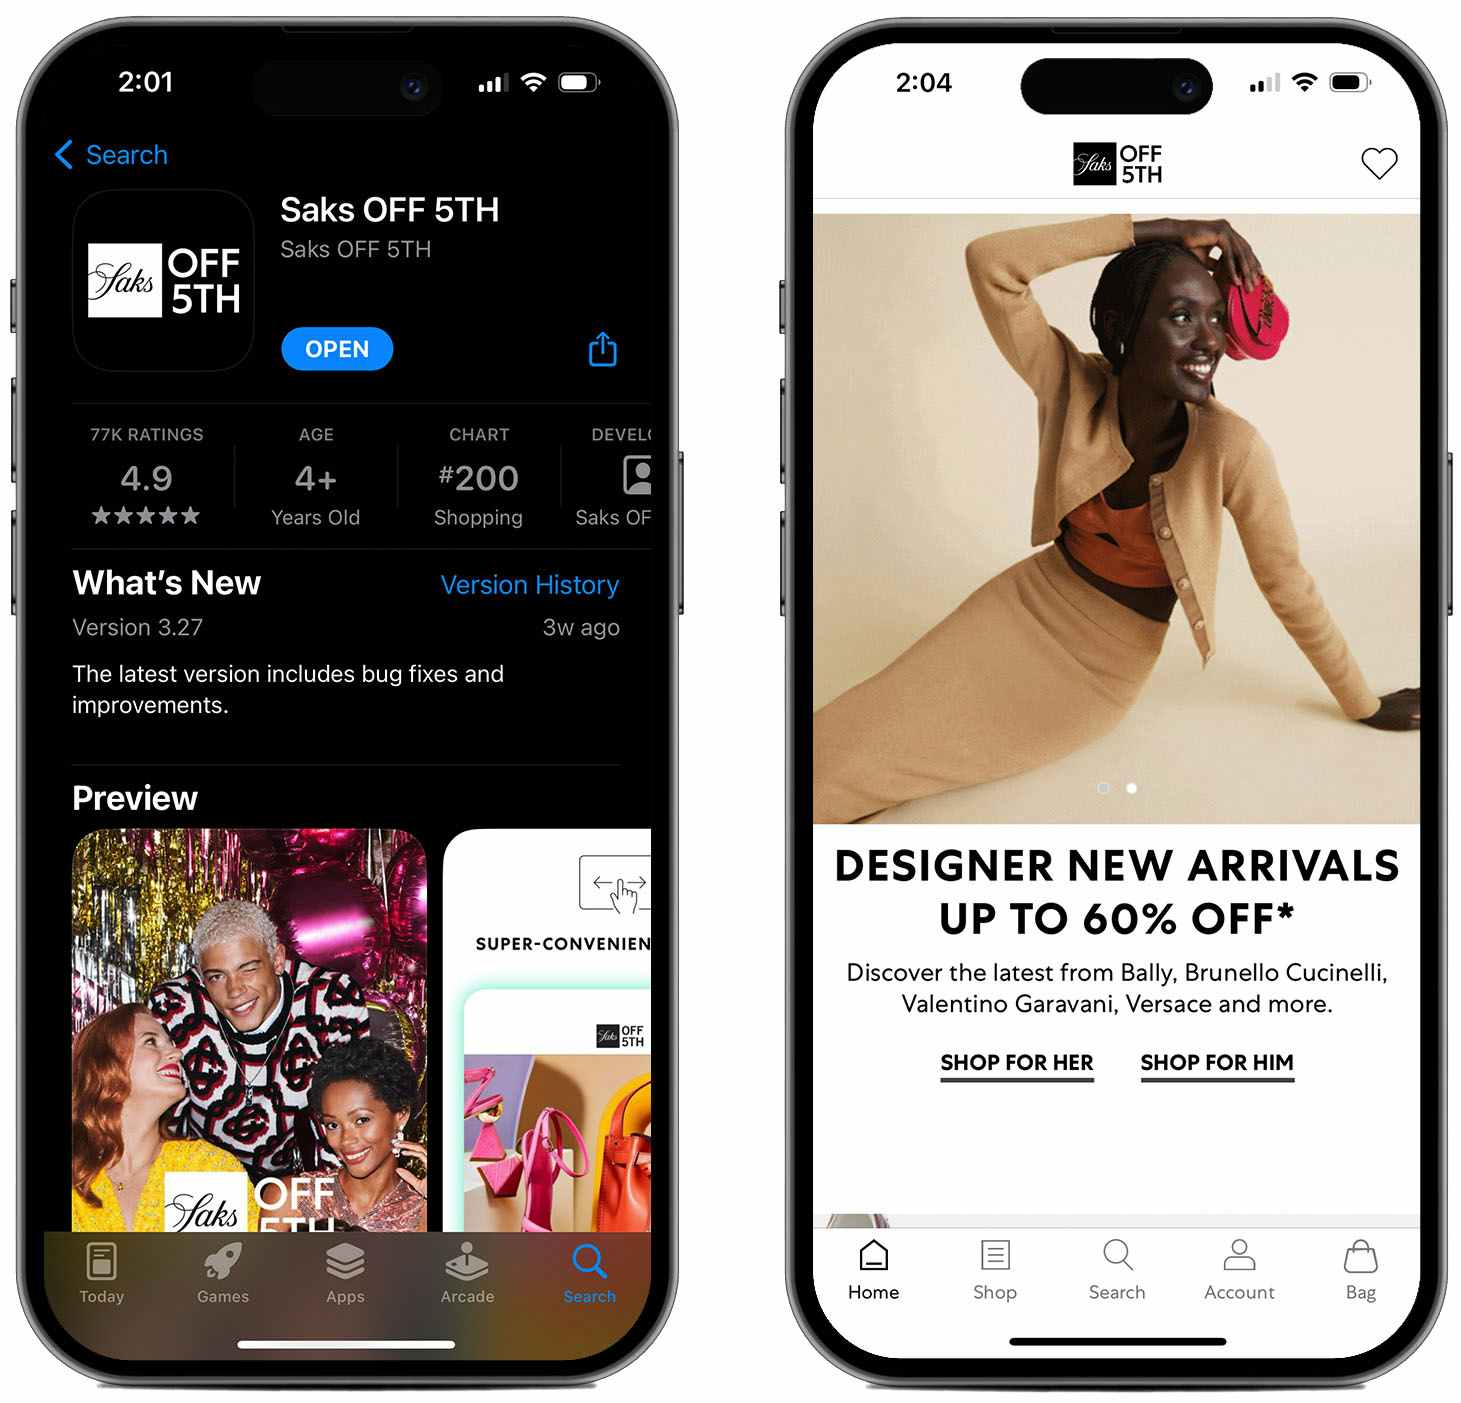 Two phones, one displaying the download screen for the Saks Off 5th app on the app store, and the other displaying the Saks Off 5th app homepage